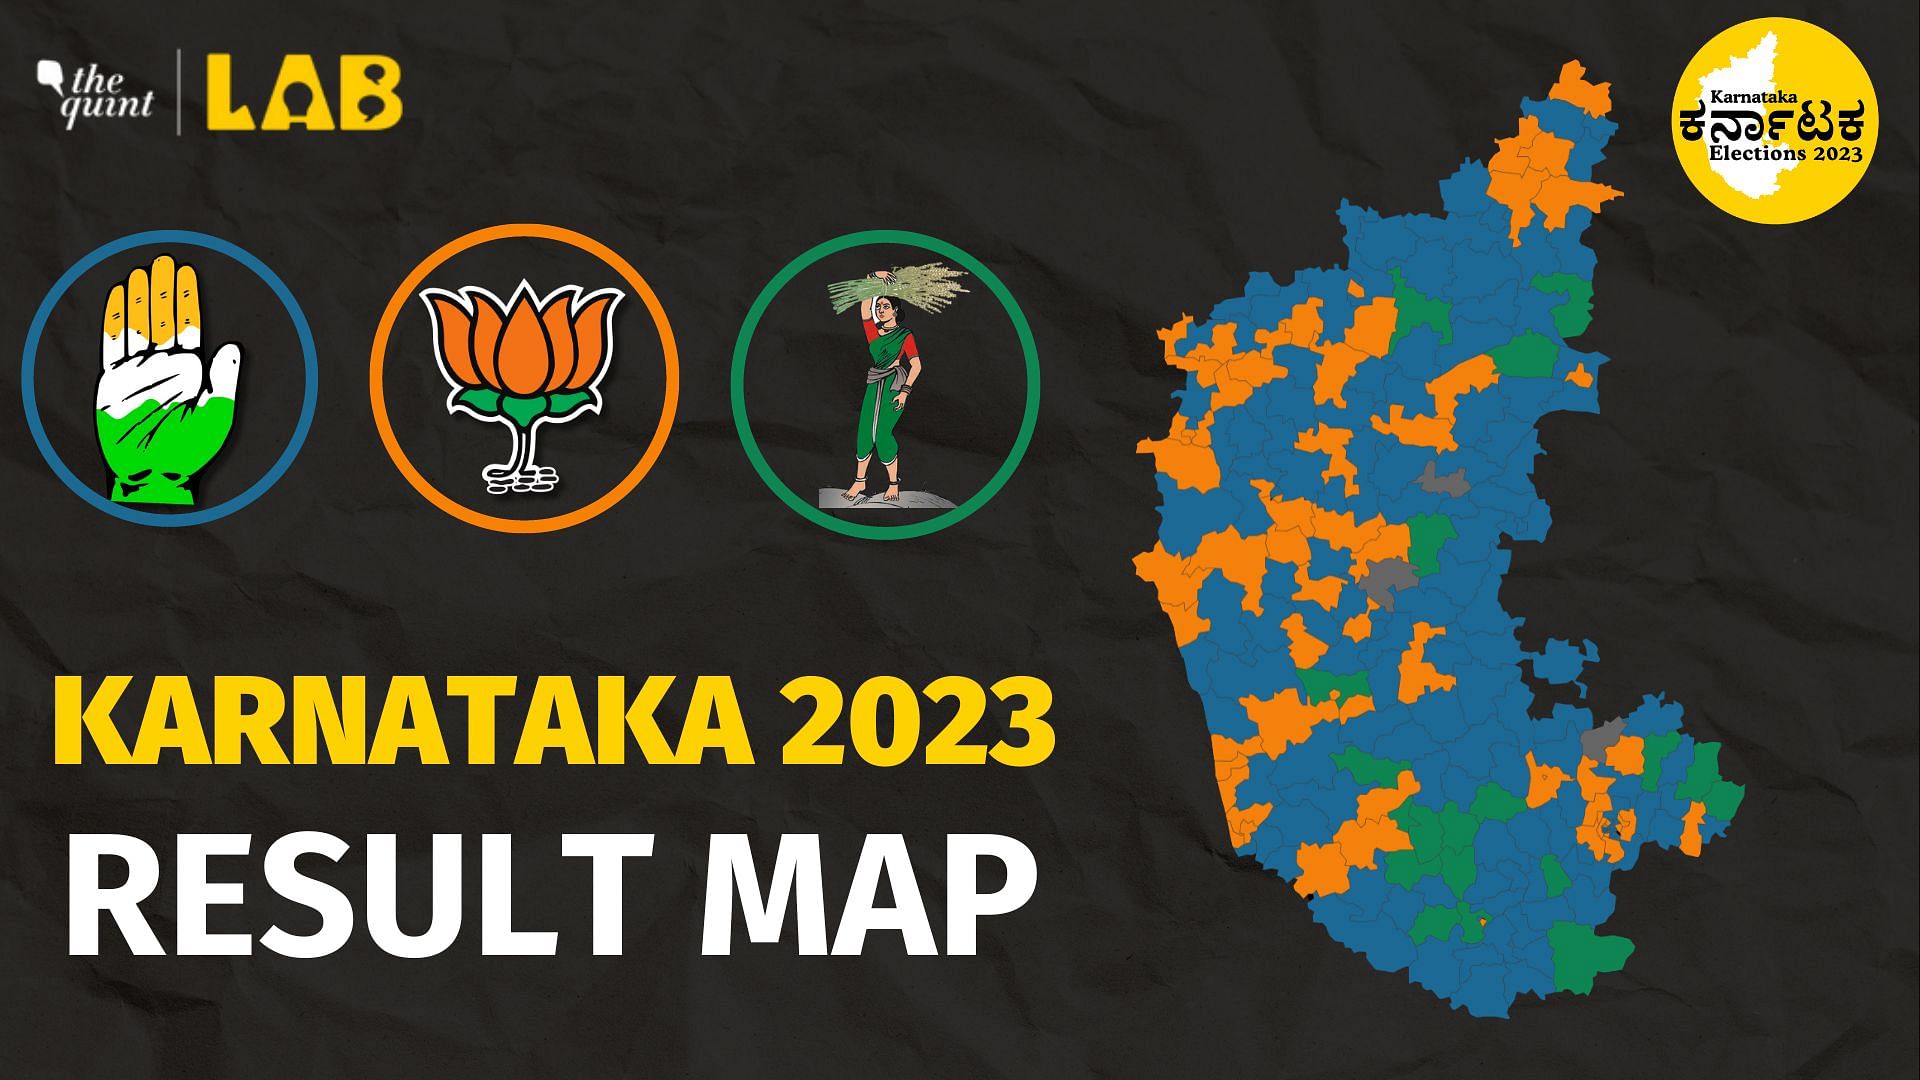 <div class="paragraphs"><p>Karnataka Elections 2023 Results Map: Check who won - BJP, Congress or JD(S), where they performed well, and which parts of the state they floundered.</p></div>